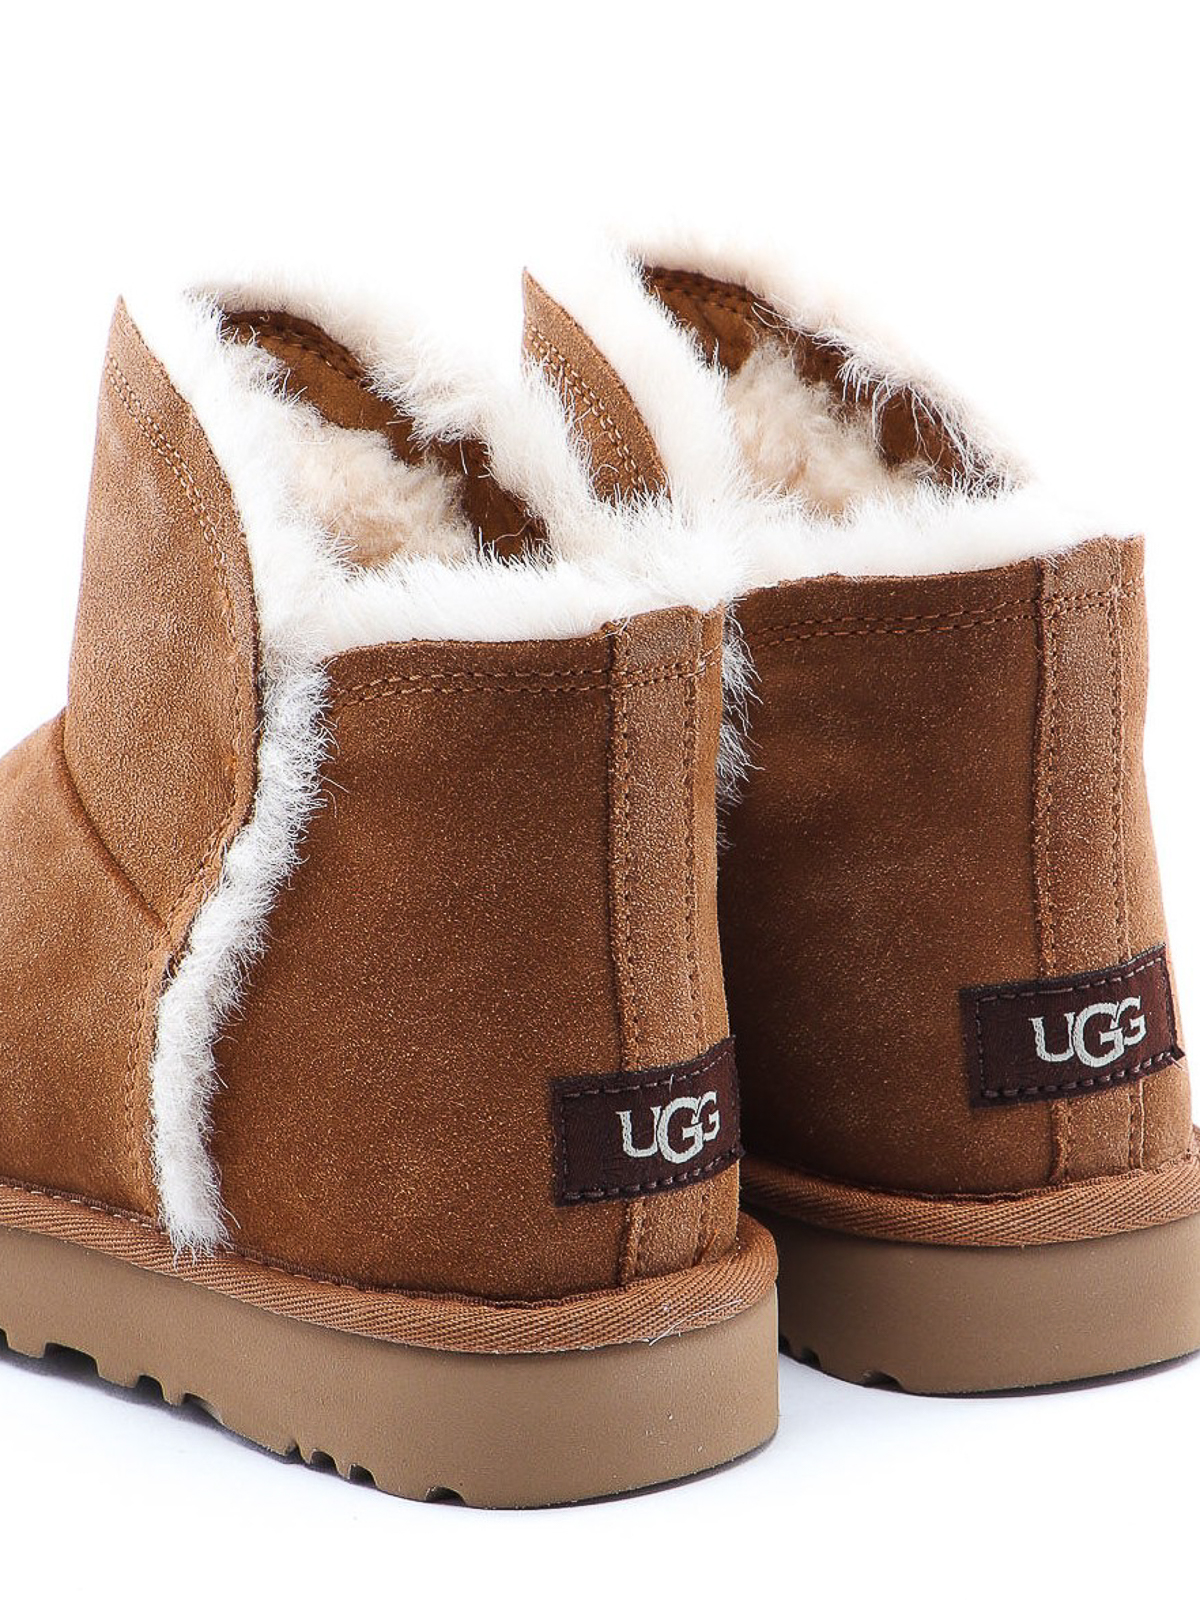 ankle high uggs